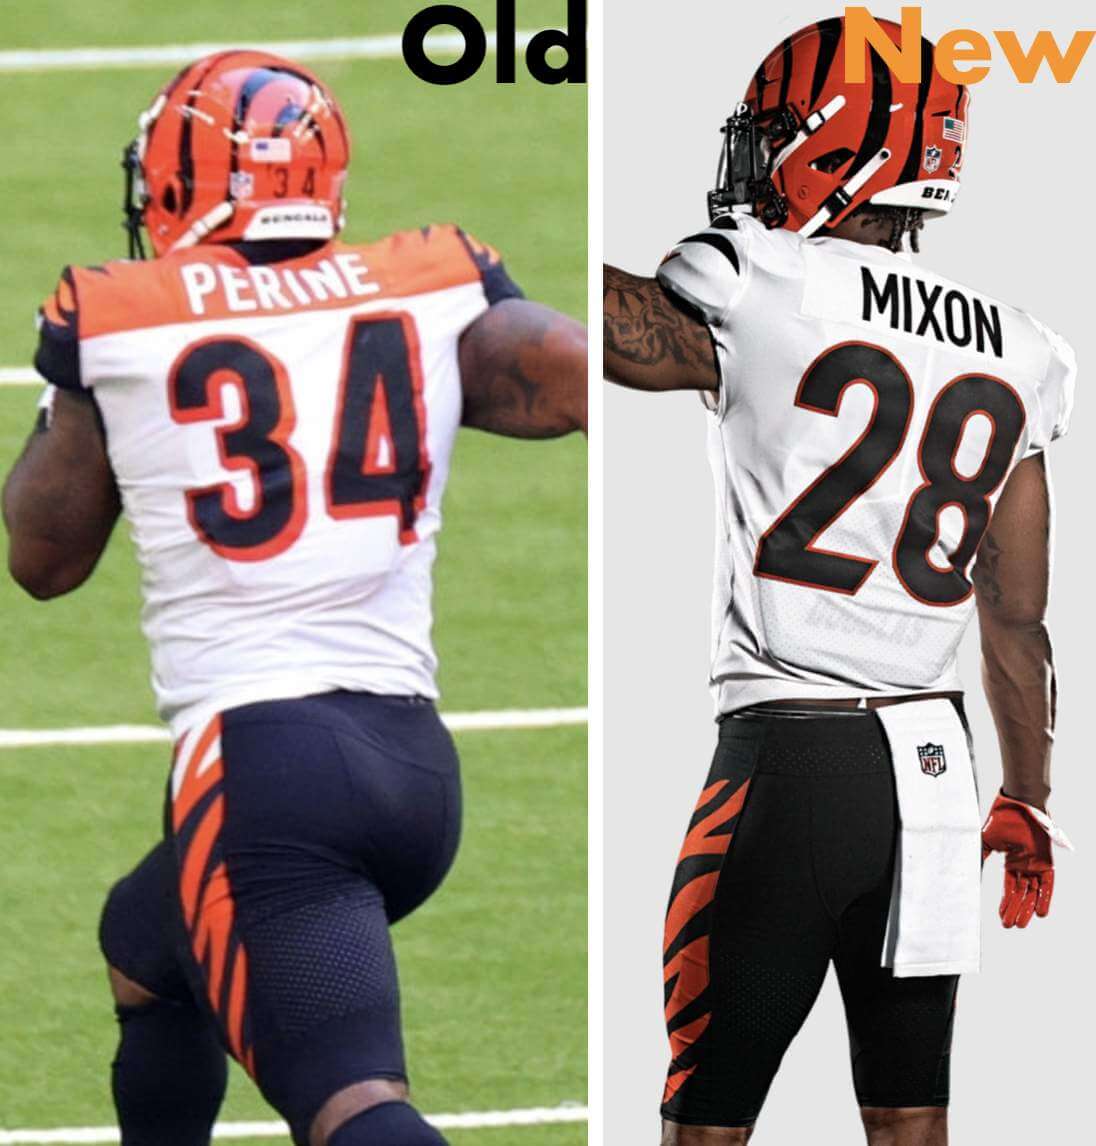 Bengals will wear black jerseys and white pants vs. Browns - Cincy